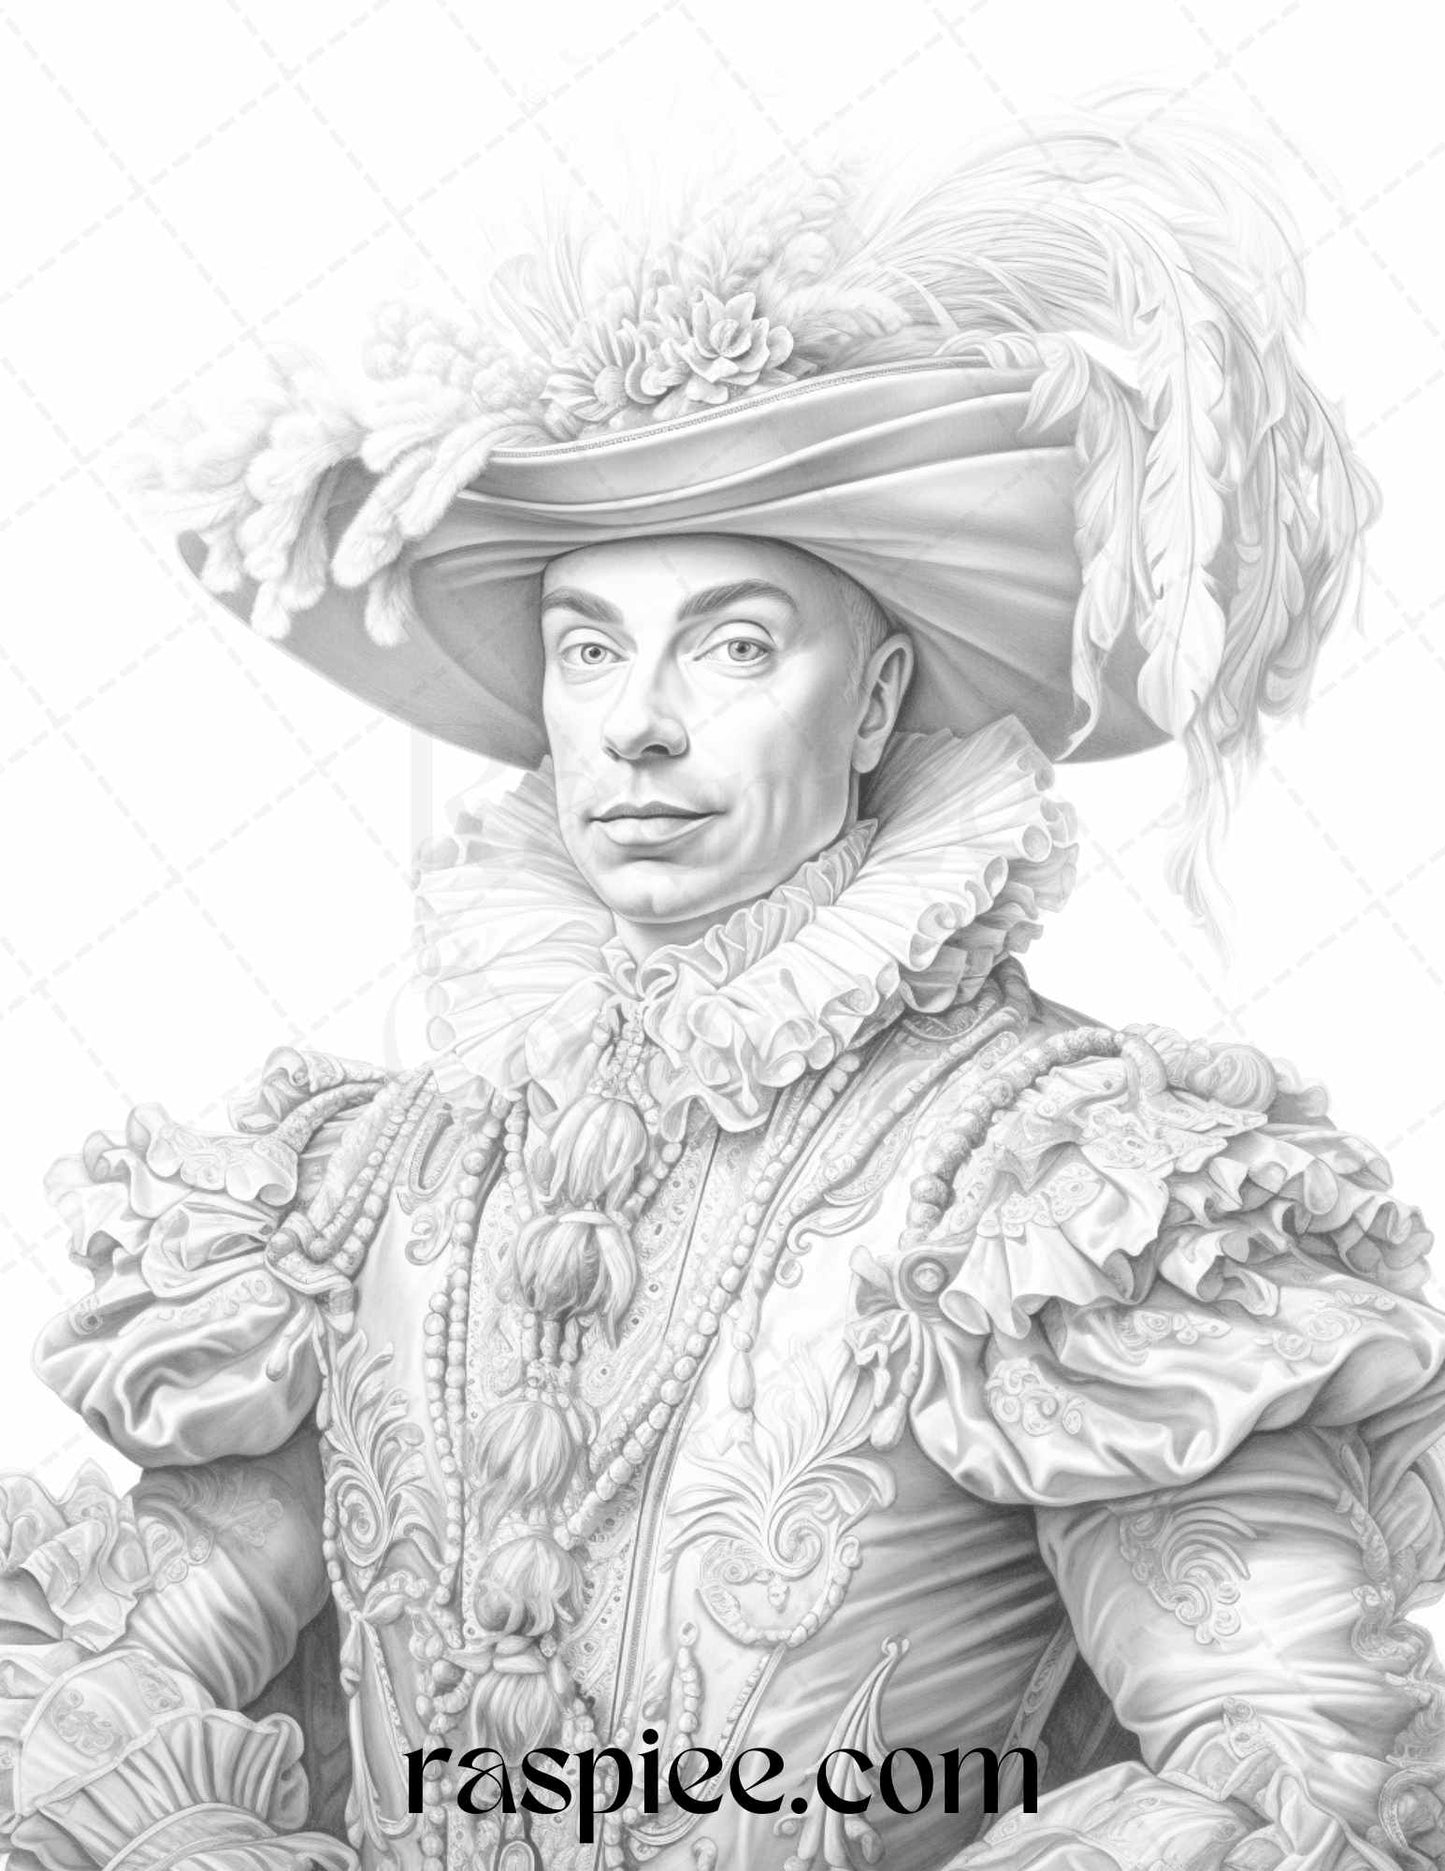 Baroque Man Portrait Grayscale Coloring Pages, Vintage Portraits Printable, High-Quality Grayscale Art, Adult Coloring Book Stress Relief, Intricate Baroque Designs